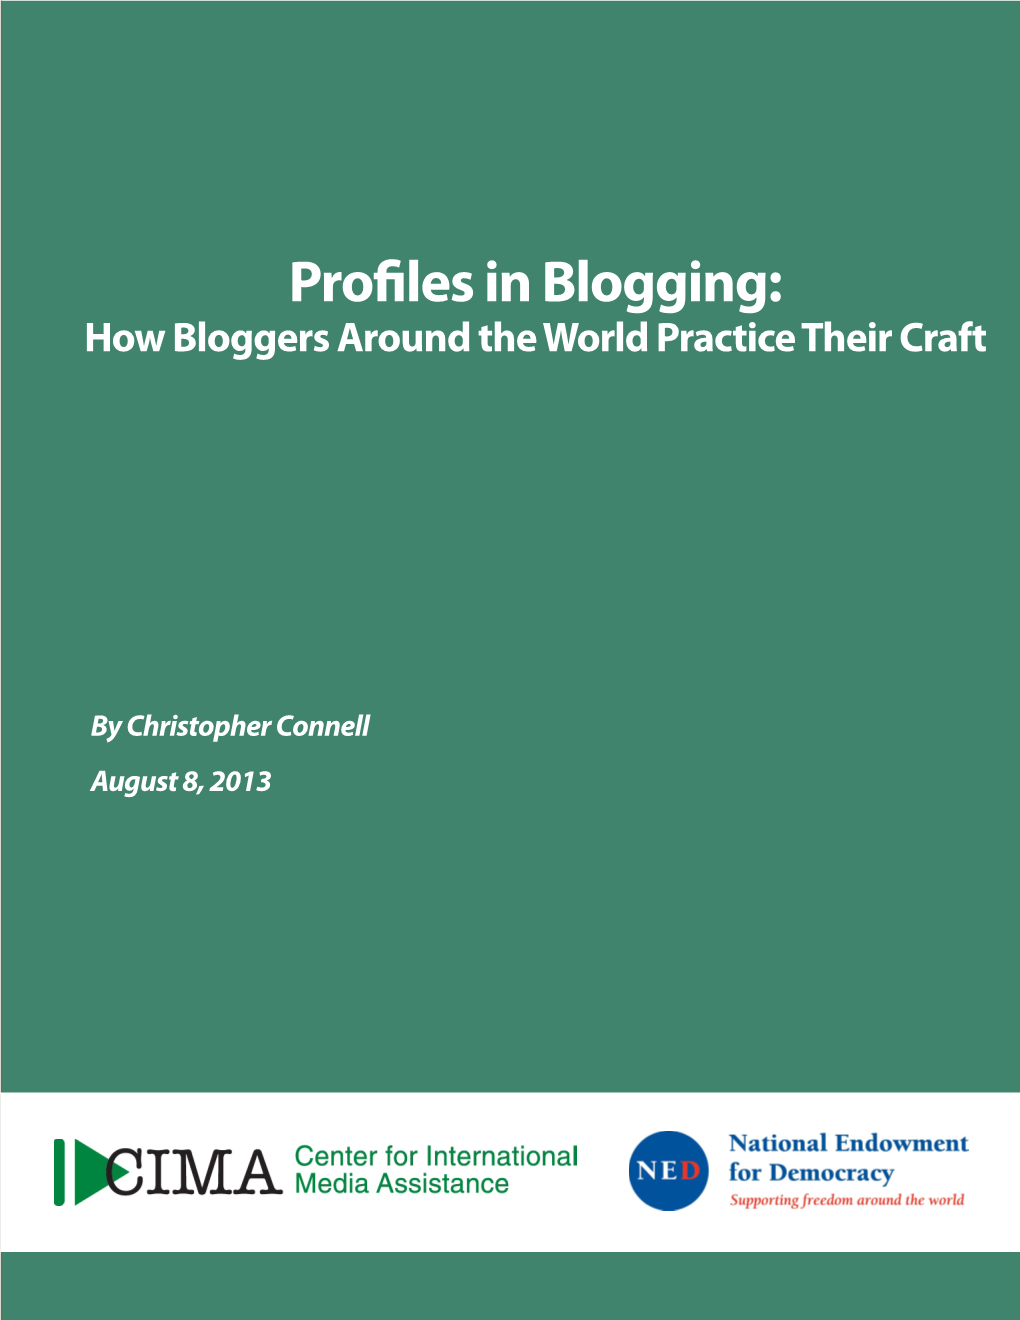 Profiles in Blogging: How Bloggers Around the World Practice Their Craft